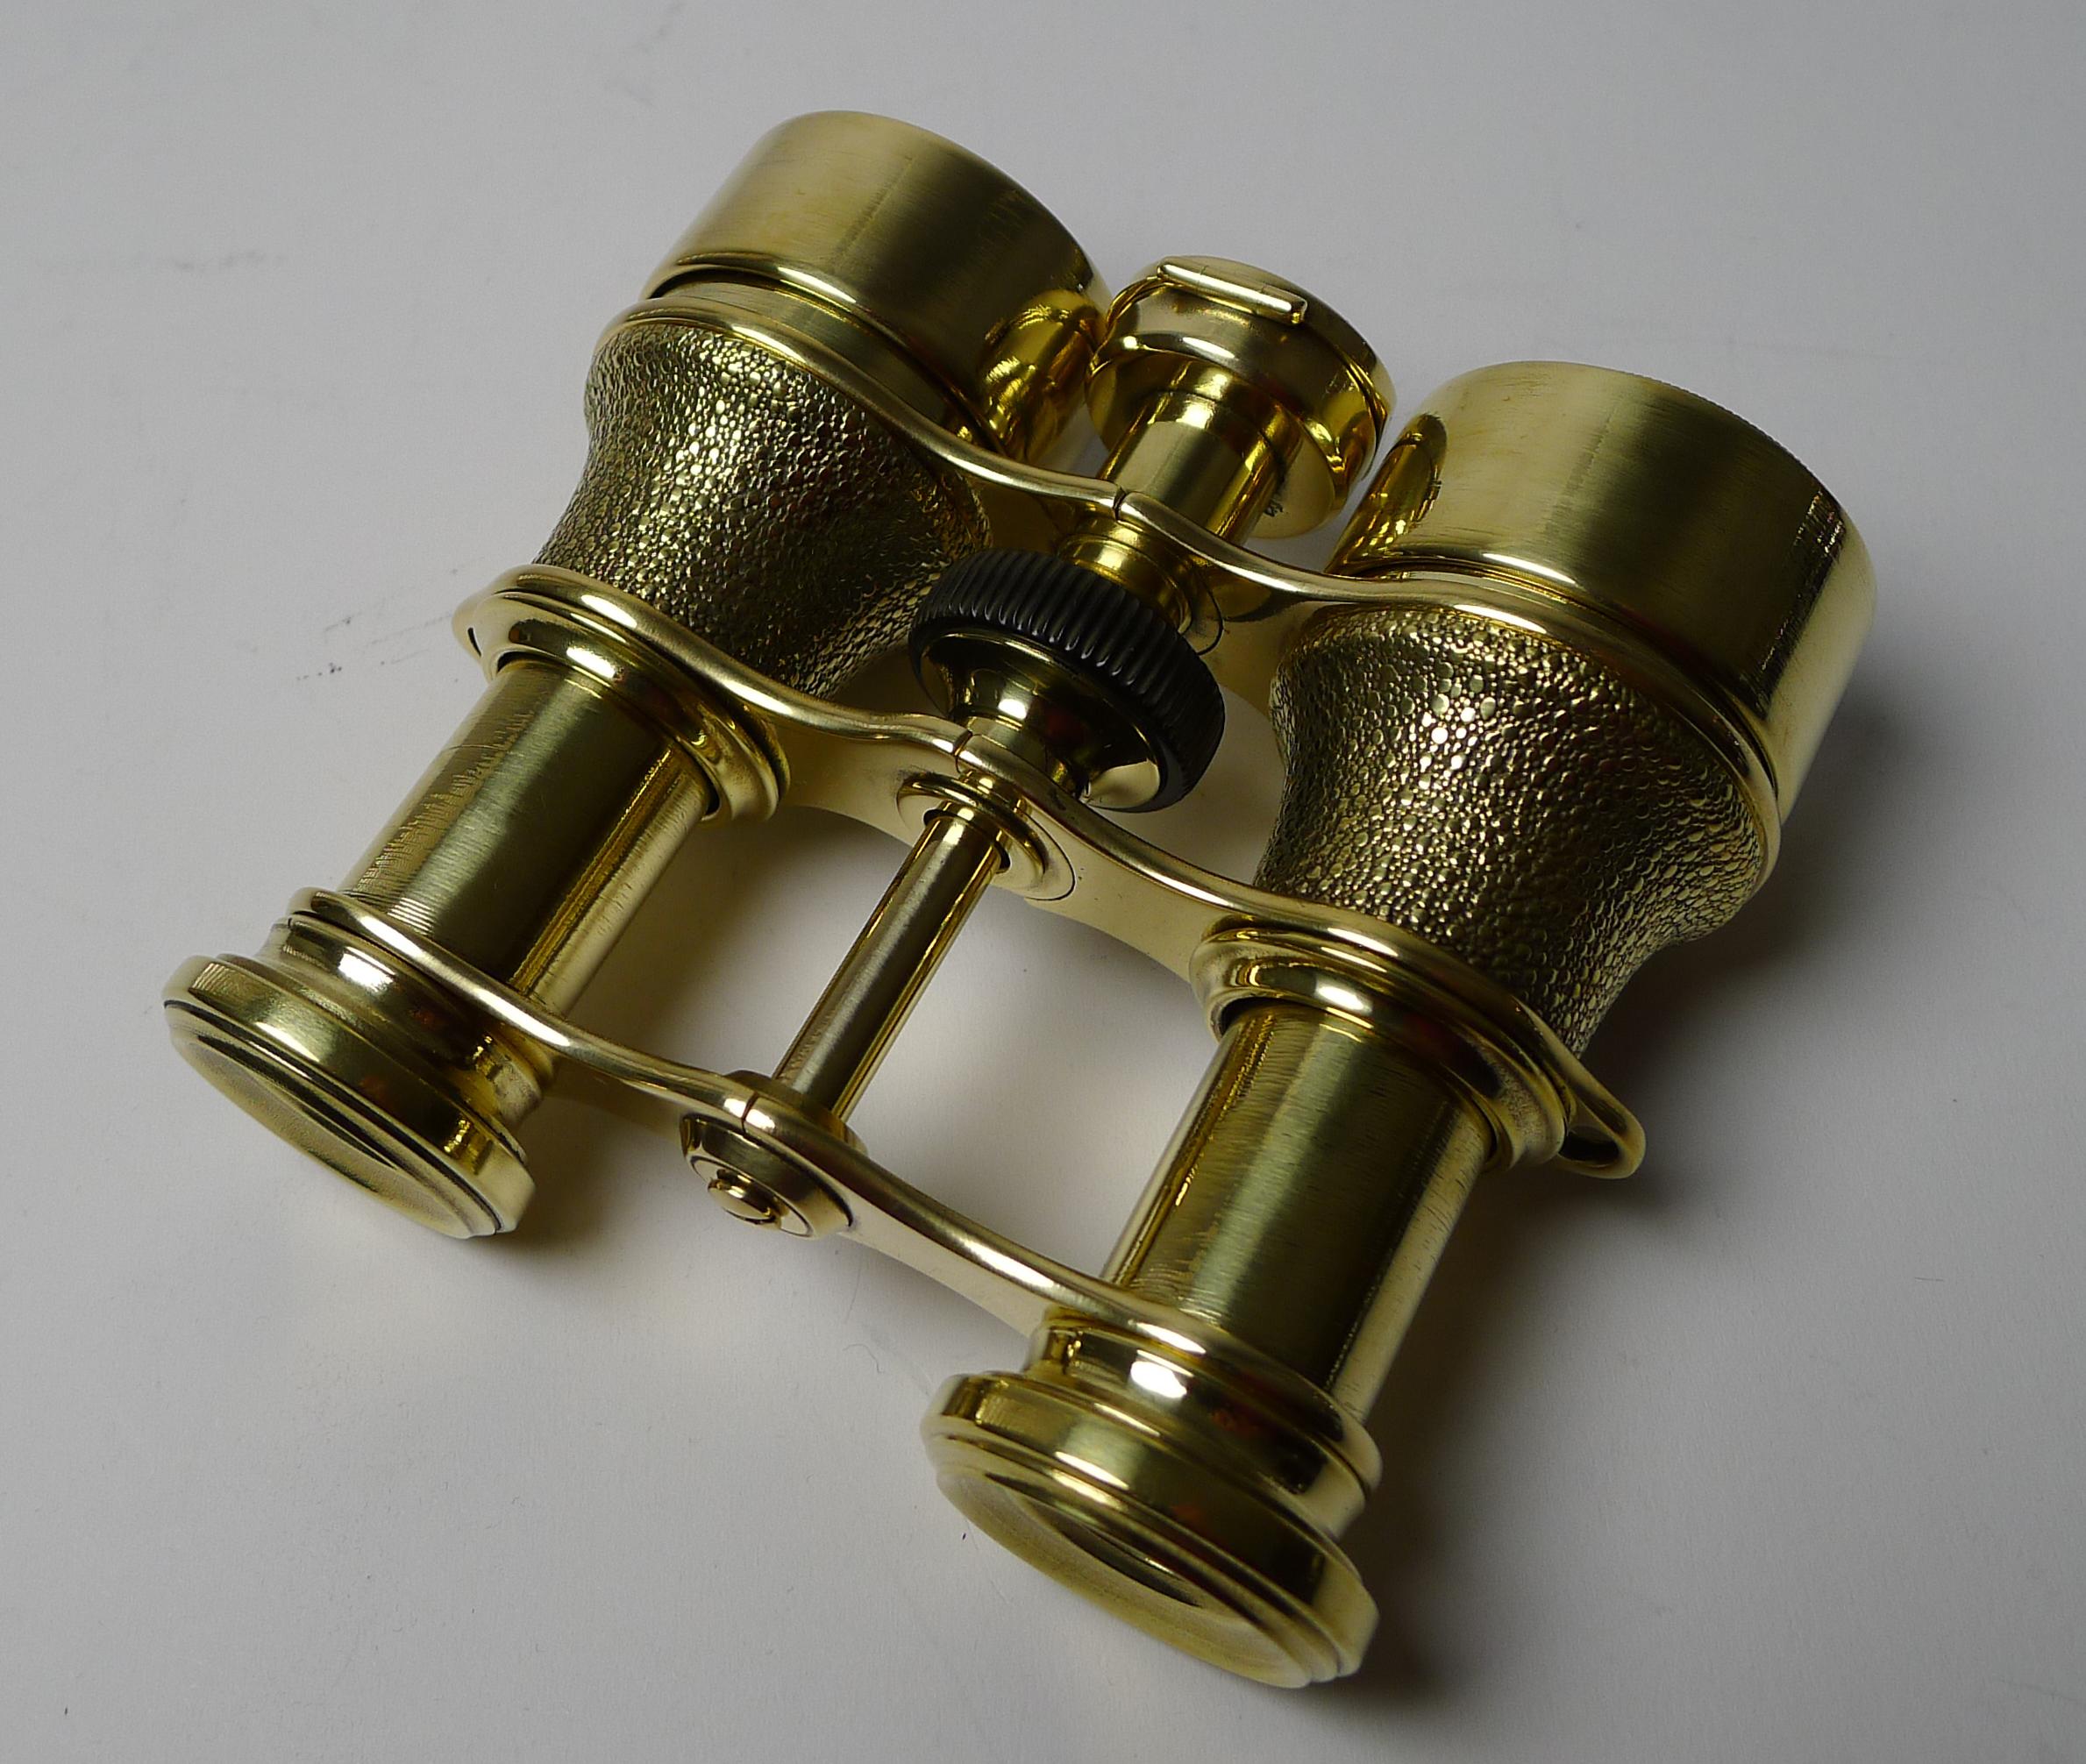 Early 20th Century Antique English Field Glasses / Binoculars by Lawrence and Mayo, with Compass